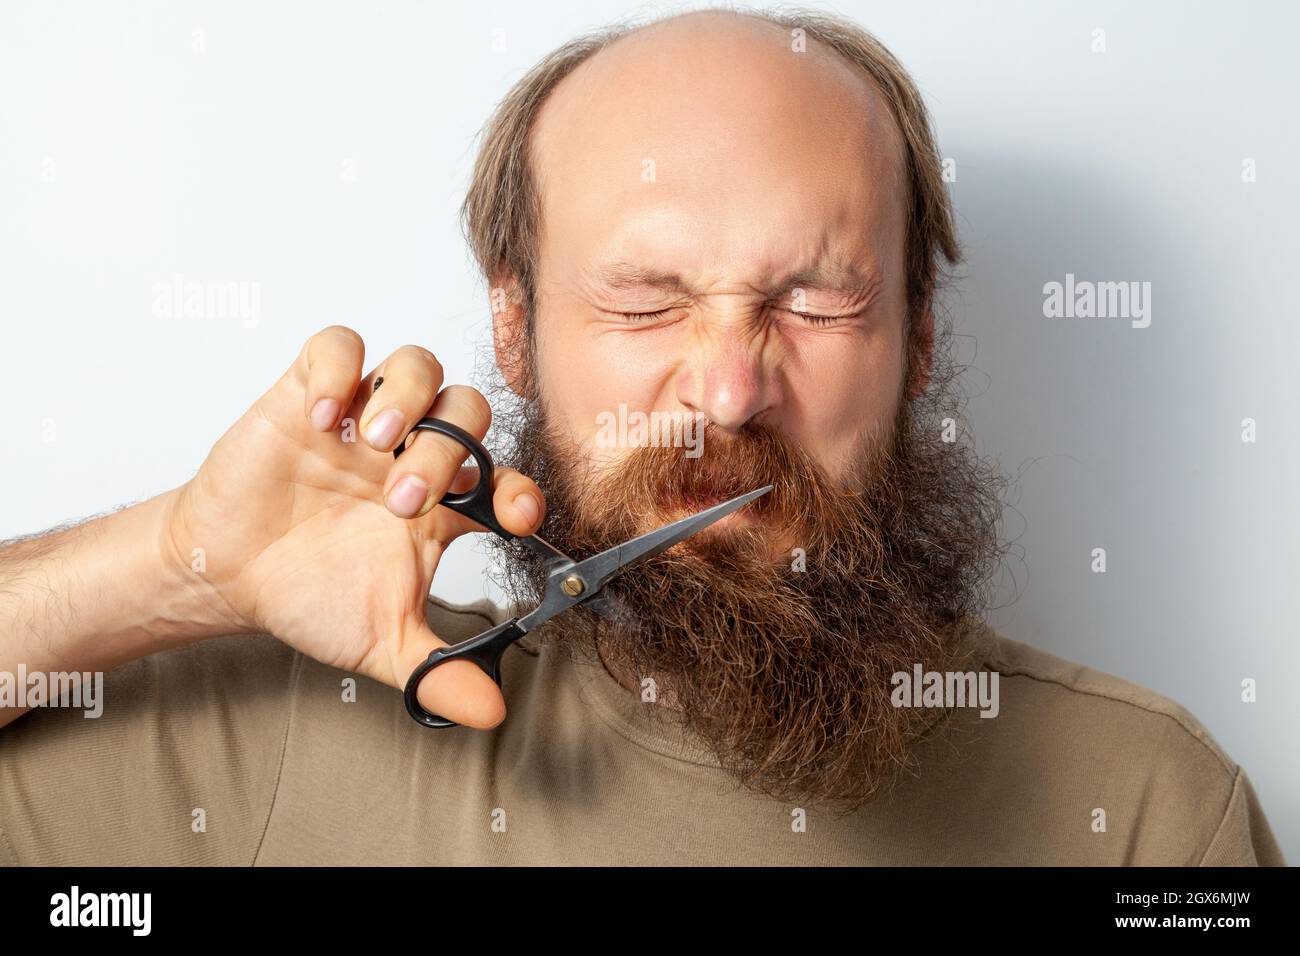 Portrait of male cutting of his beard, screws up his eyes, feels regret, holding scissors in hands, bald bearded man wearing T-shirt. Indoor studio shot isolated on gray background. Stock Photo